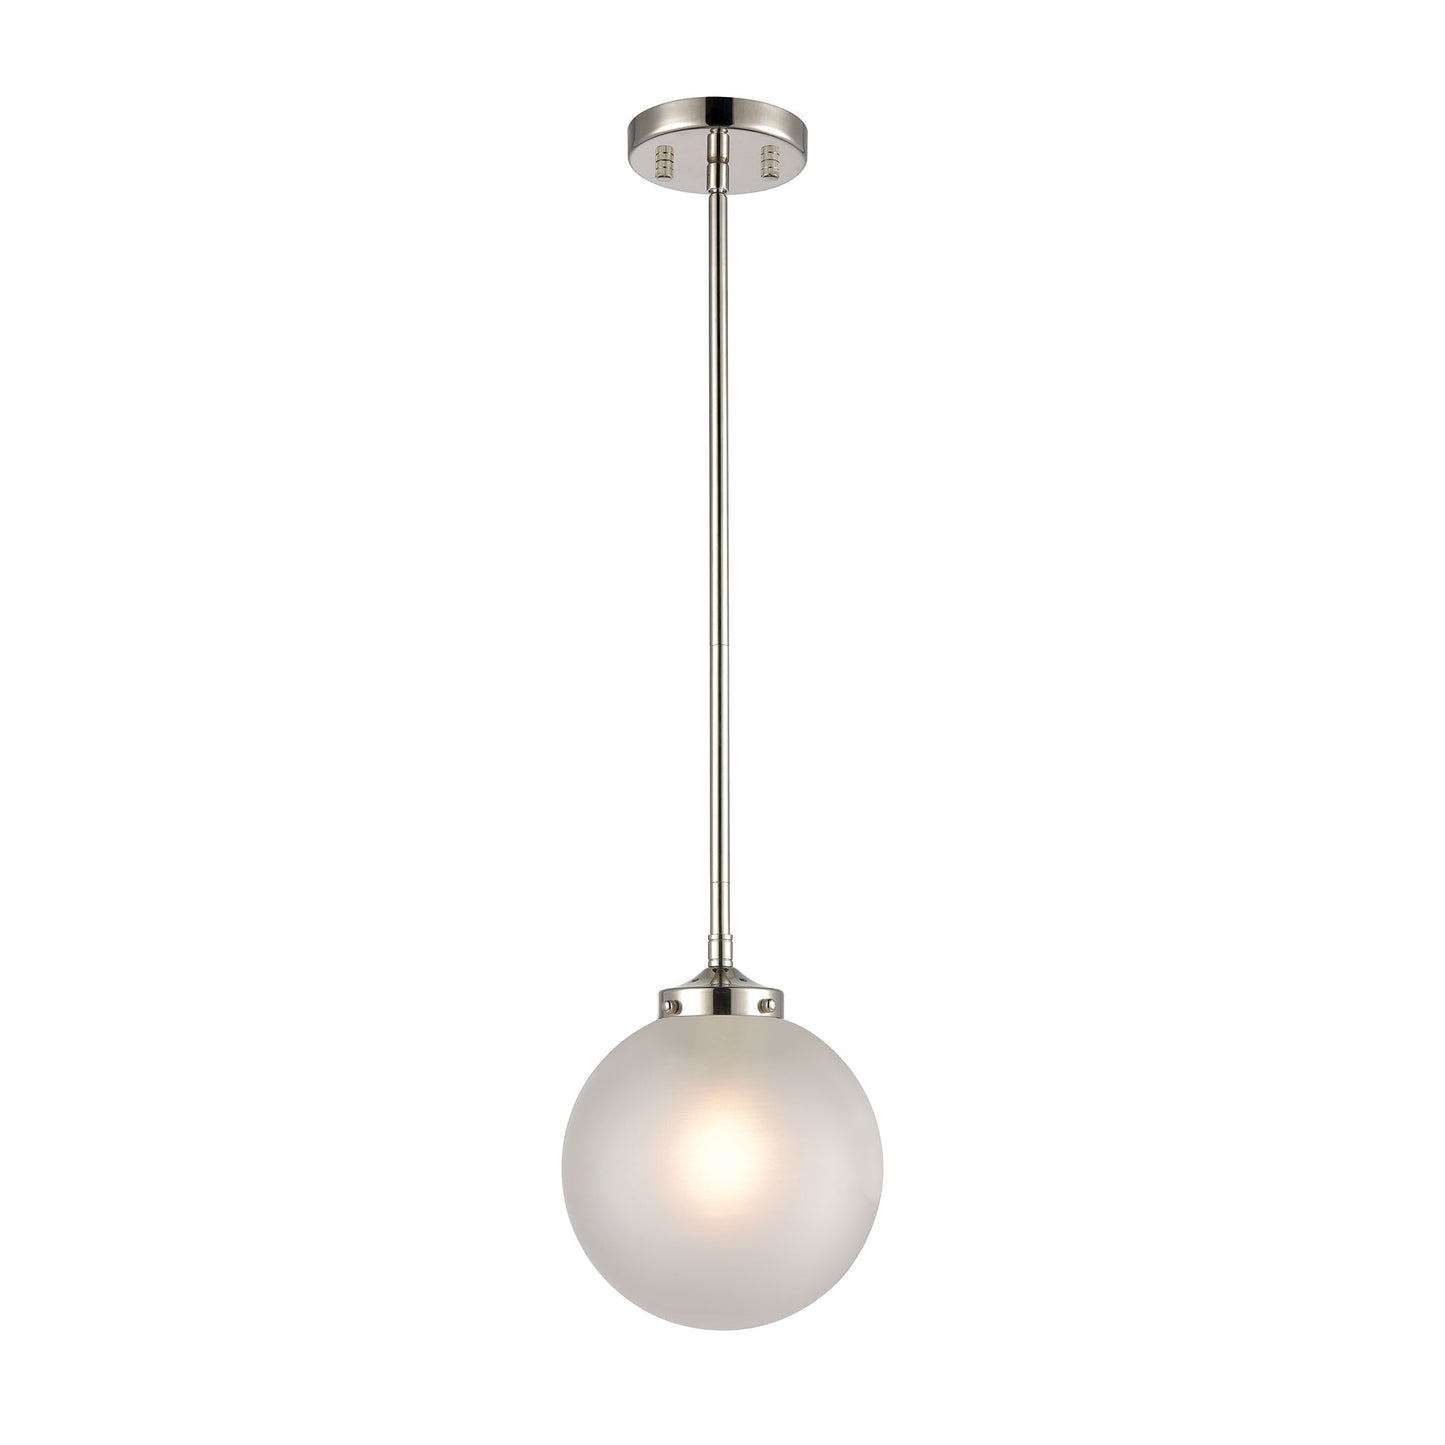 ELK Lighting 15364/1 - Boudreaux 8" Wide 1-Light Mini Pendant in Polished Nickel with Frosted